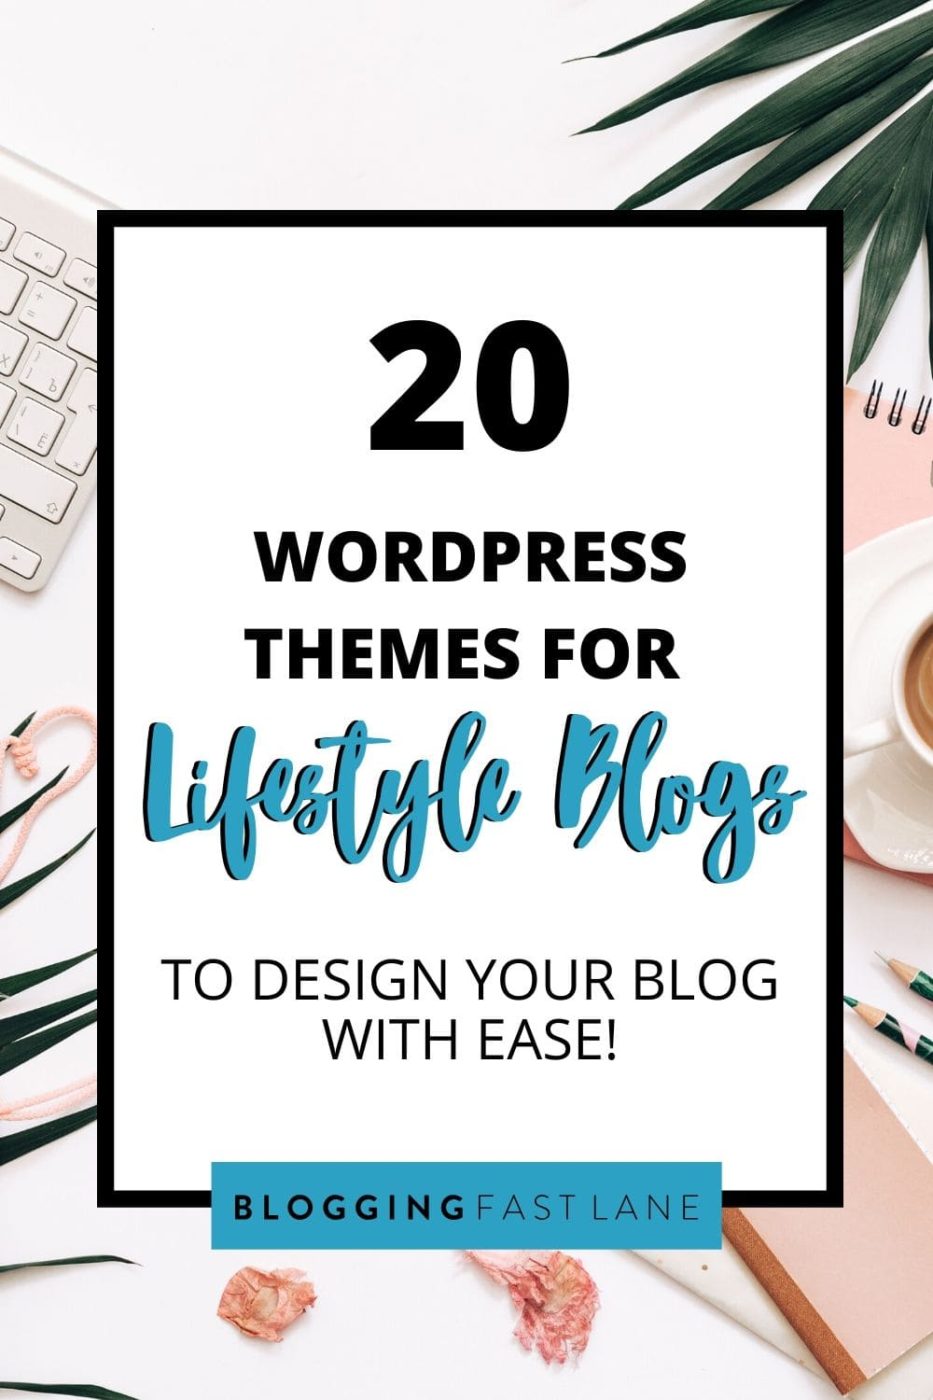 Best WordPress Themes For Lifestyle Blogs | If you're getting ready to build a lifestyle blog, check out our list of 20 best WordPress themes to design your blog with ease. 